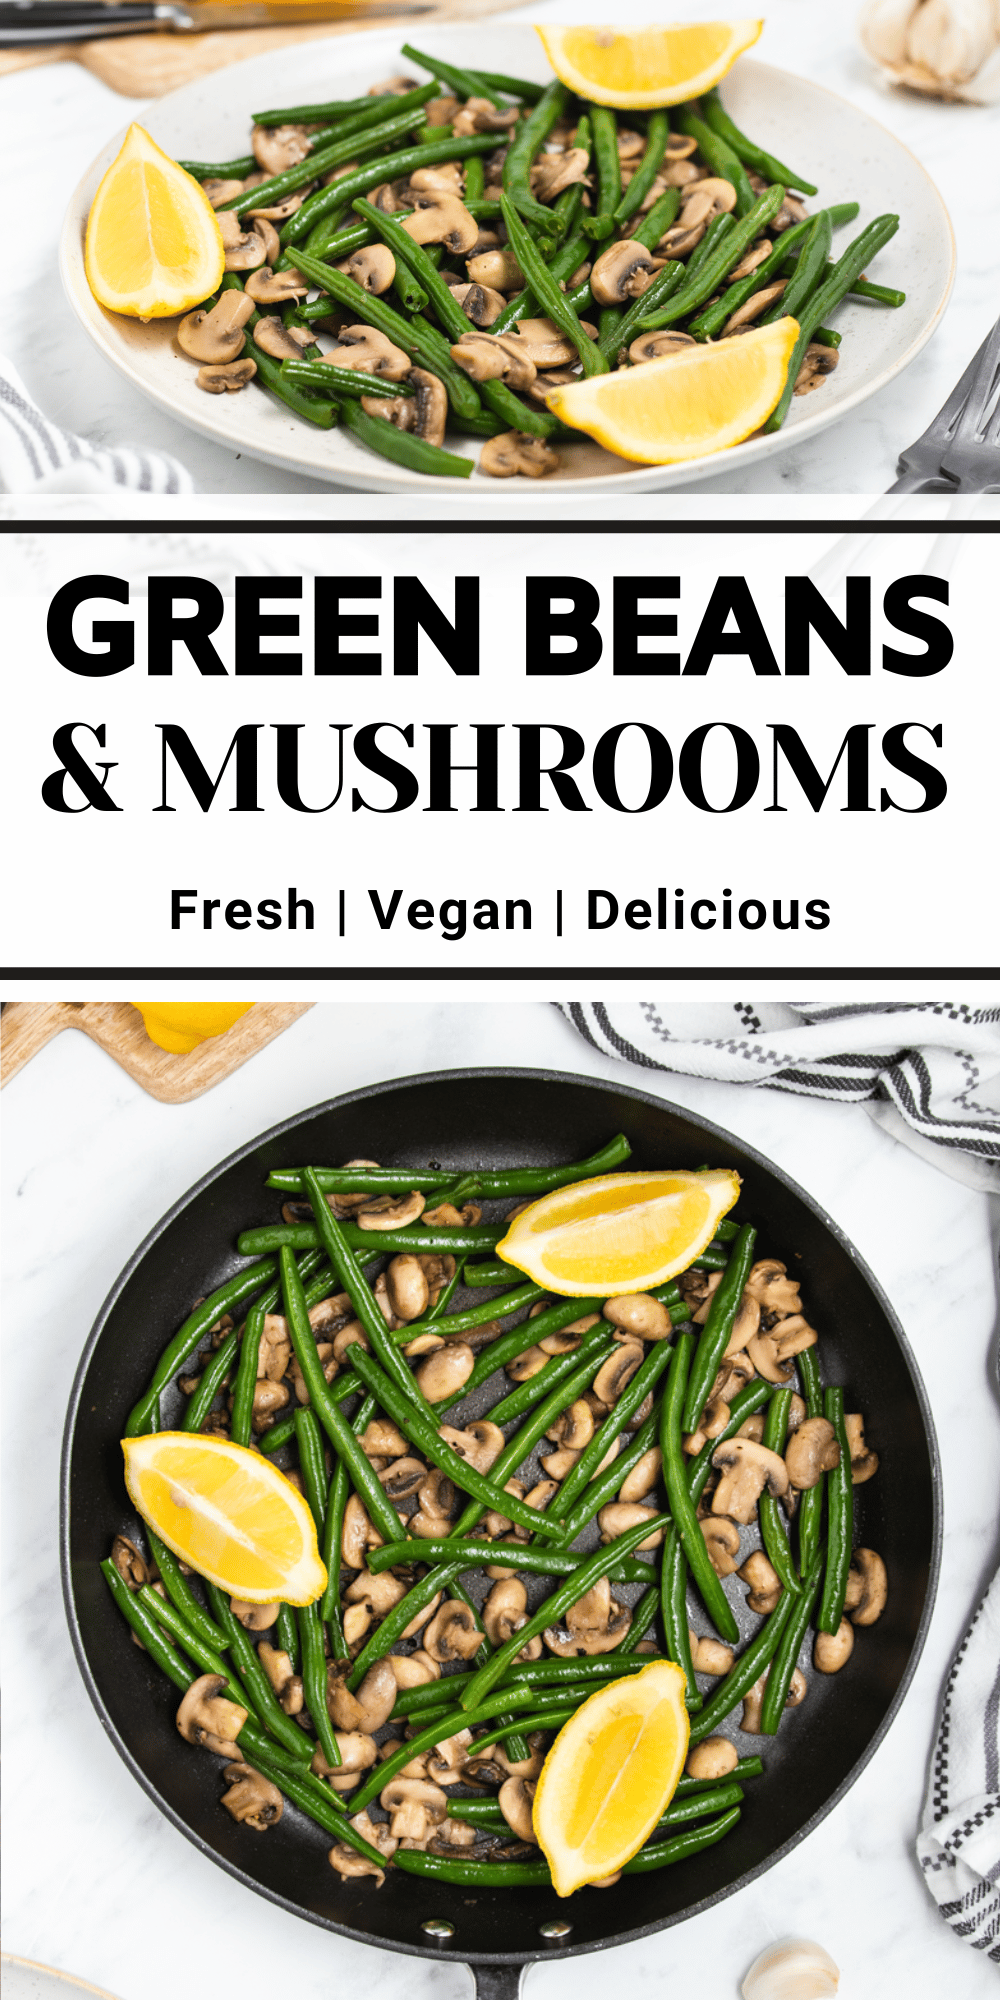 green beans with yellow lemon quarters in a black skillet in bottom picture and top picture the same but on a white plate